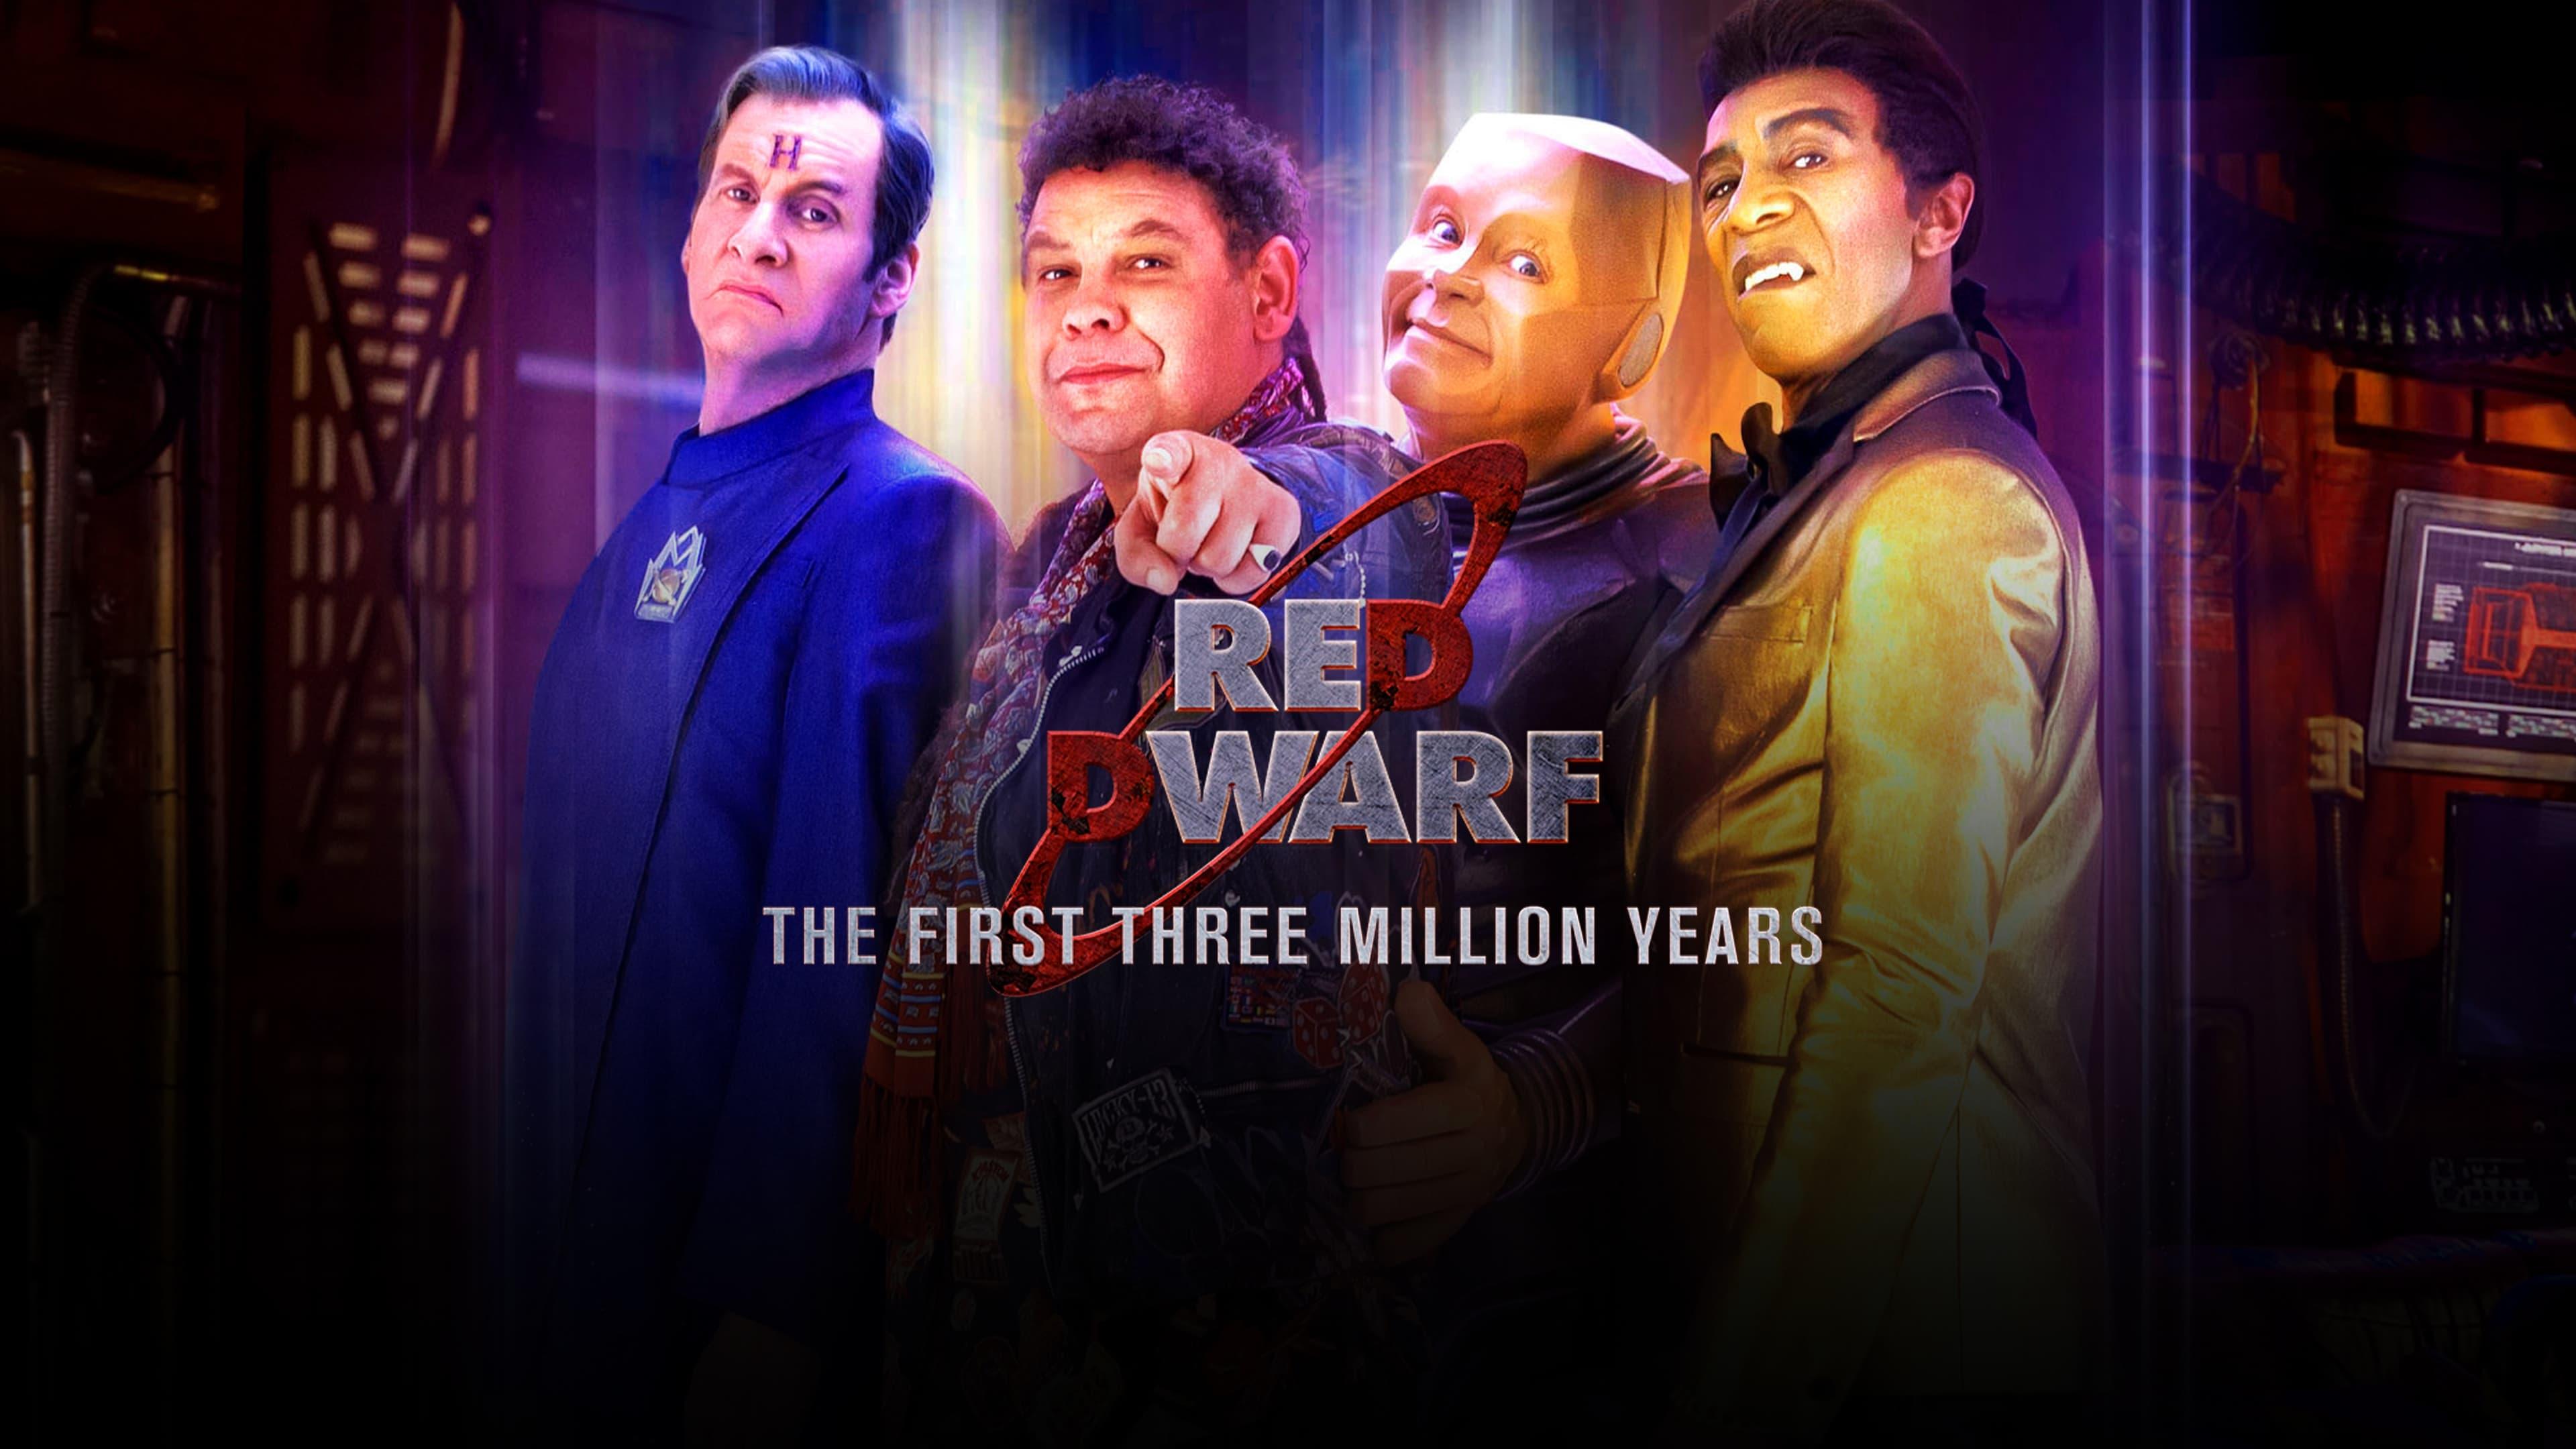 Red Dwarf: The First Three Million Years backdrop